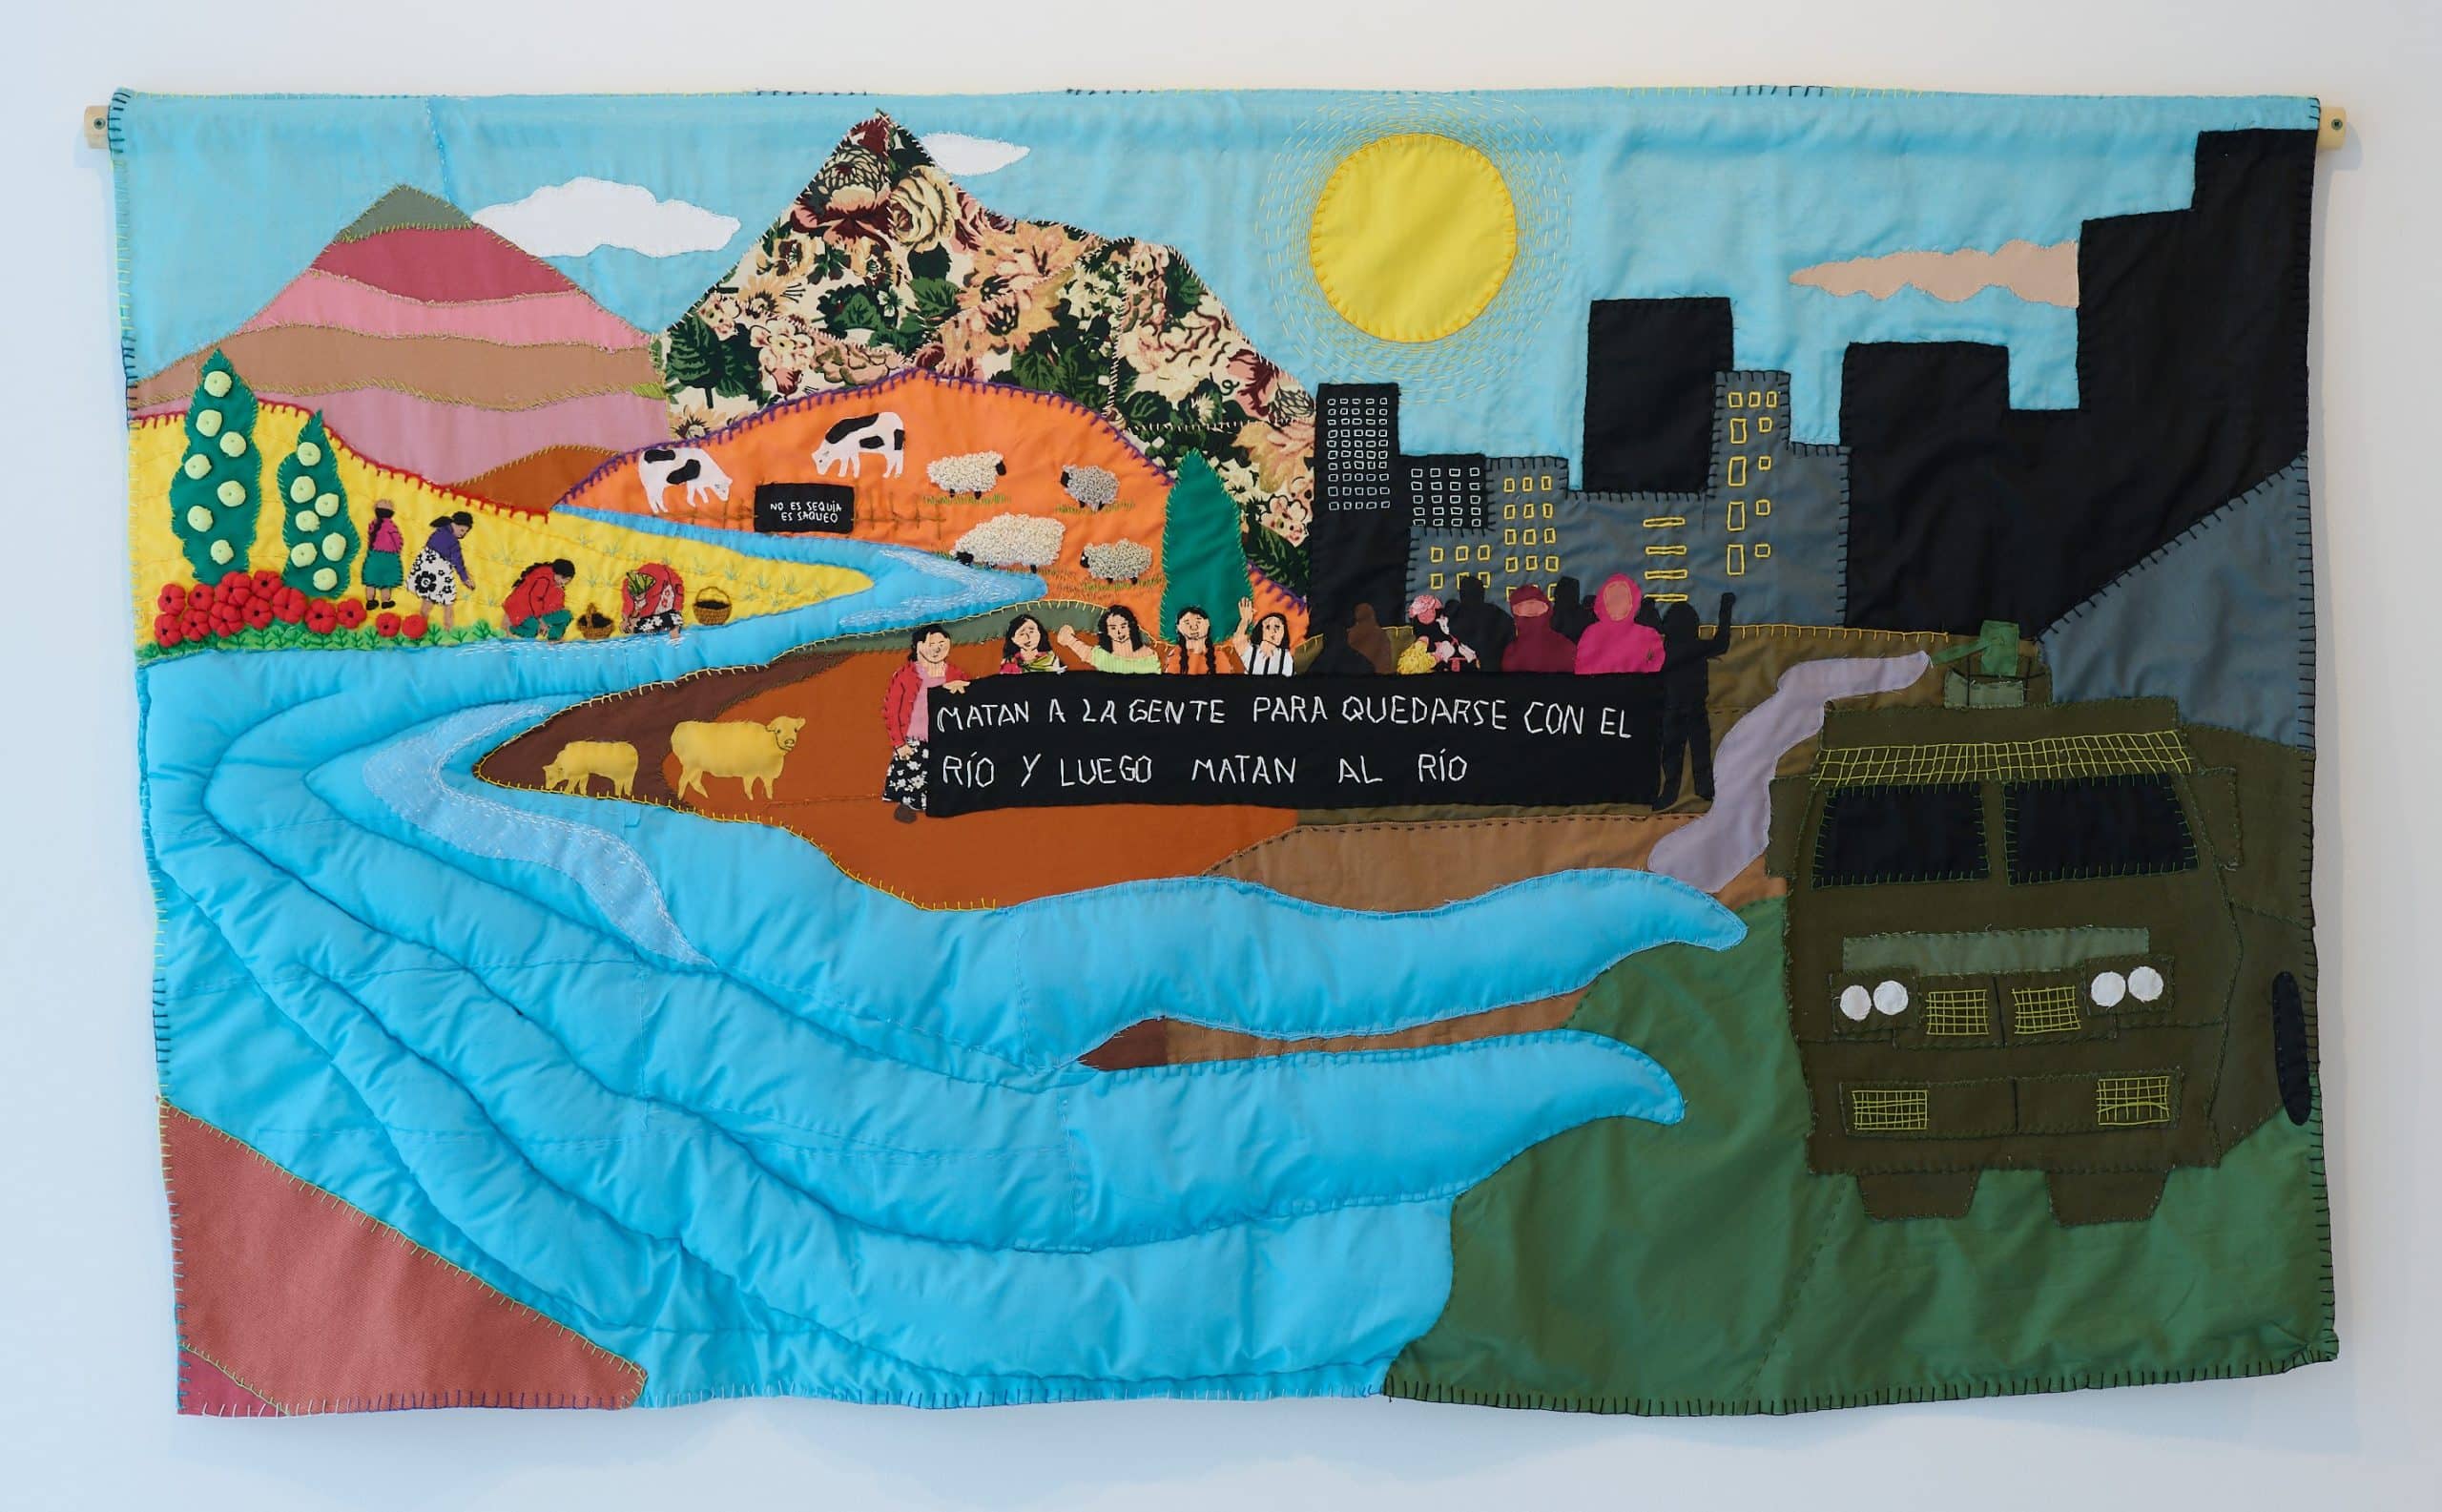 An arpillera depicting a scene with colourful mountains and fields, a blue river, a city, military vehicle and individuals holding a protest sign.